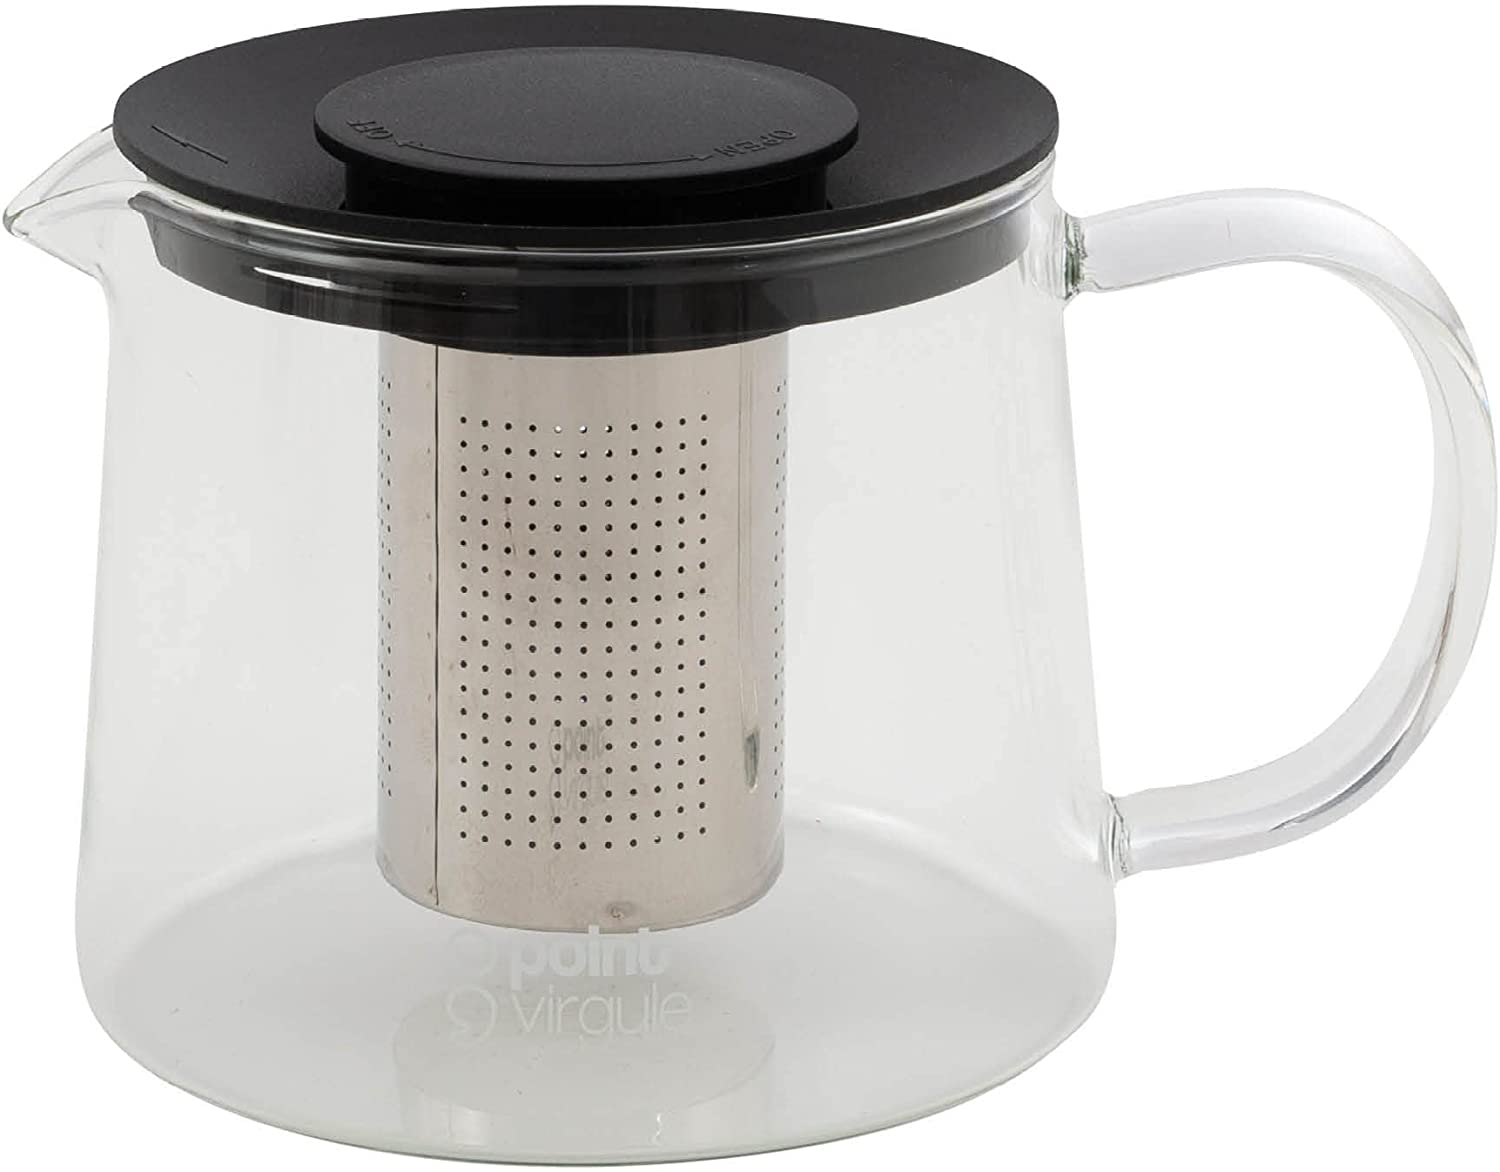 Point-Virgule Glass Teapot with Infuser Stainless Steel Black 1 L